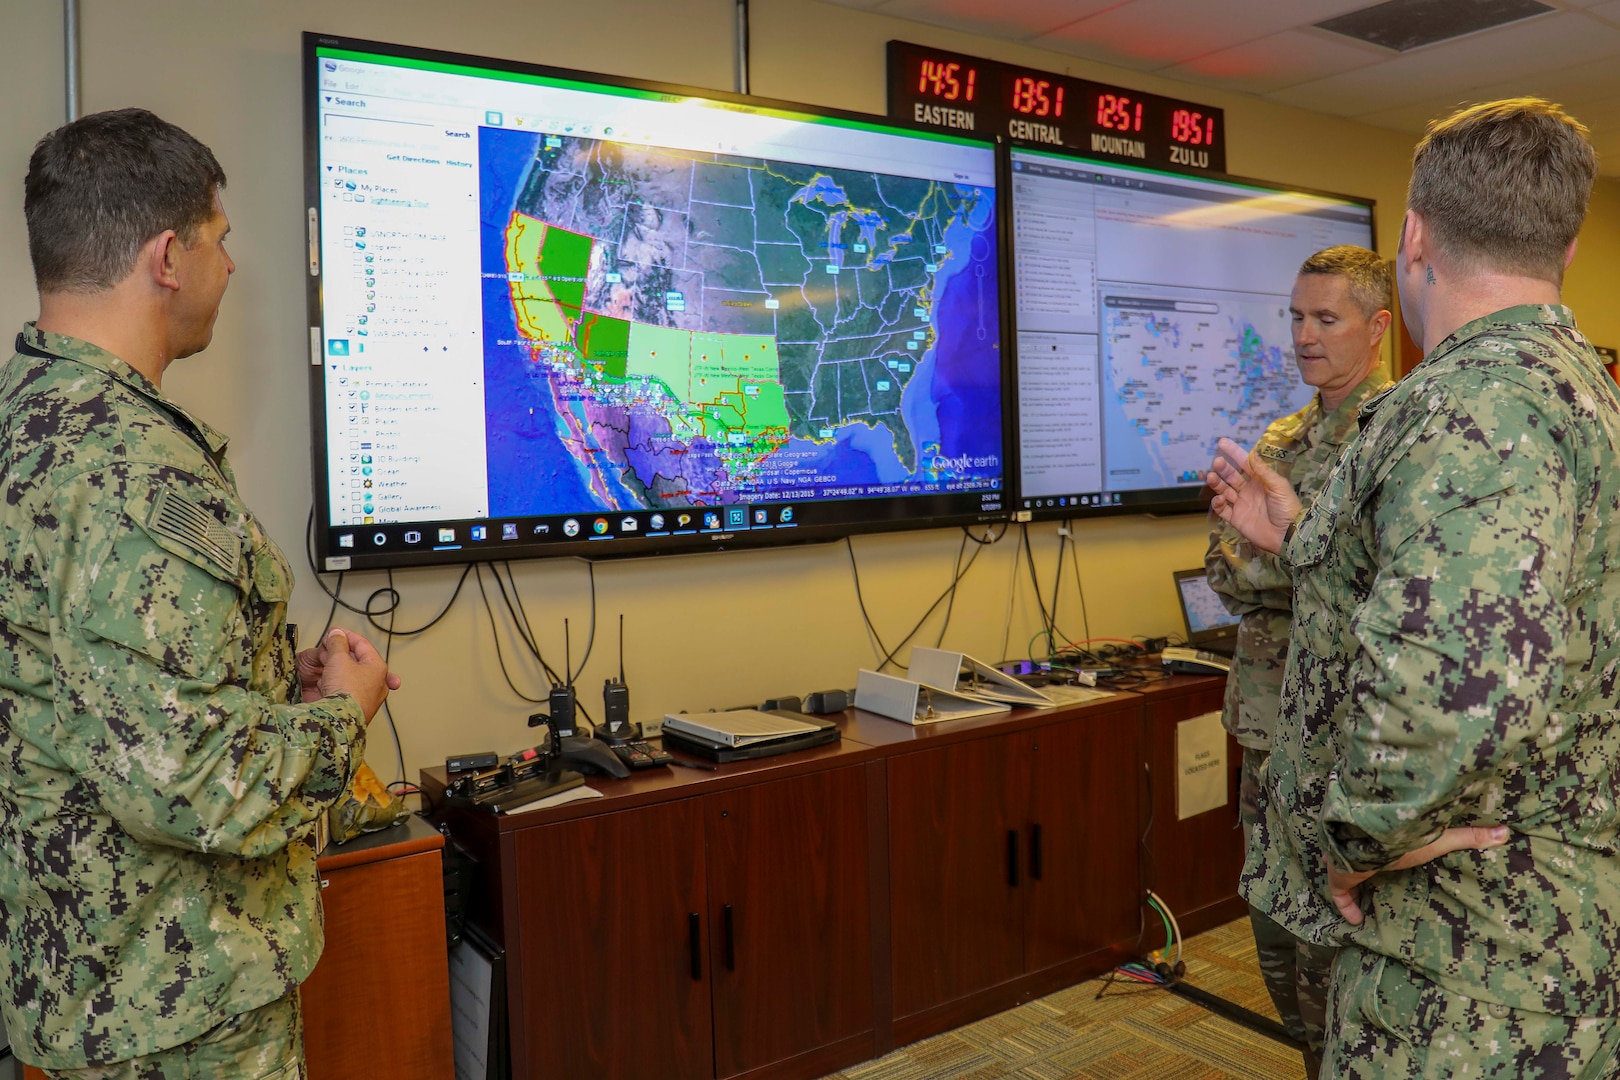 Army Command Sgt. Maj. Paul Biggs, Senior Enlisted Leader for Futures and Concepts Center, a subordinate organization of Army Futures Command in Austin, TX., is briefed by Navy Chief Damage Controlman Benjamin Allen on the Common Operational Picture (COP), a system that allows shared situational understanding between Joint Task Force Civil Support (JTF-CS) and partner organizations. Futures and Concepts Center is located at Army Training and Doctrine Command, also headquartered at Fort Eustis and adjacent to JTF-CS. The visit was held to foster friendship and teamwork between the military neighbors. (Official DoD photo by Navy Petty Officer Third Class Michael Redd/released)